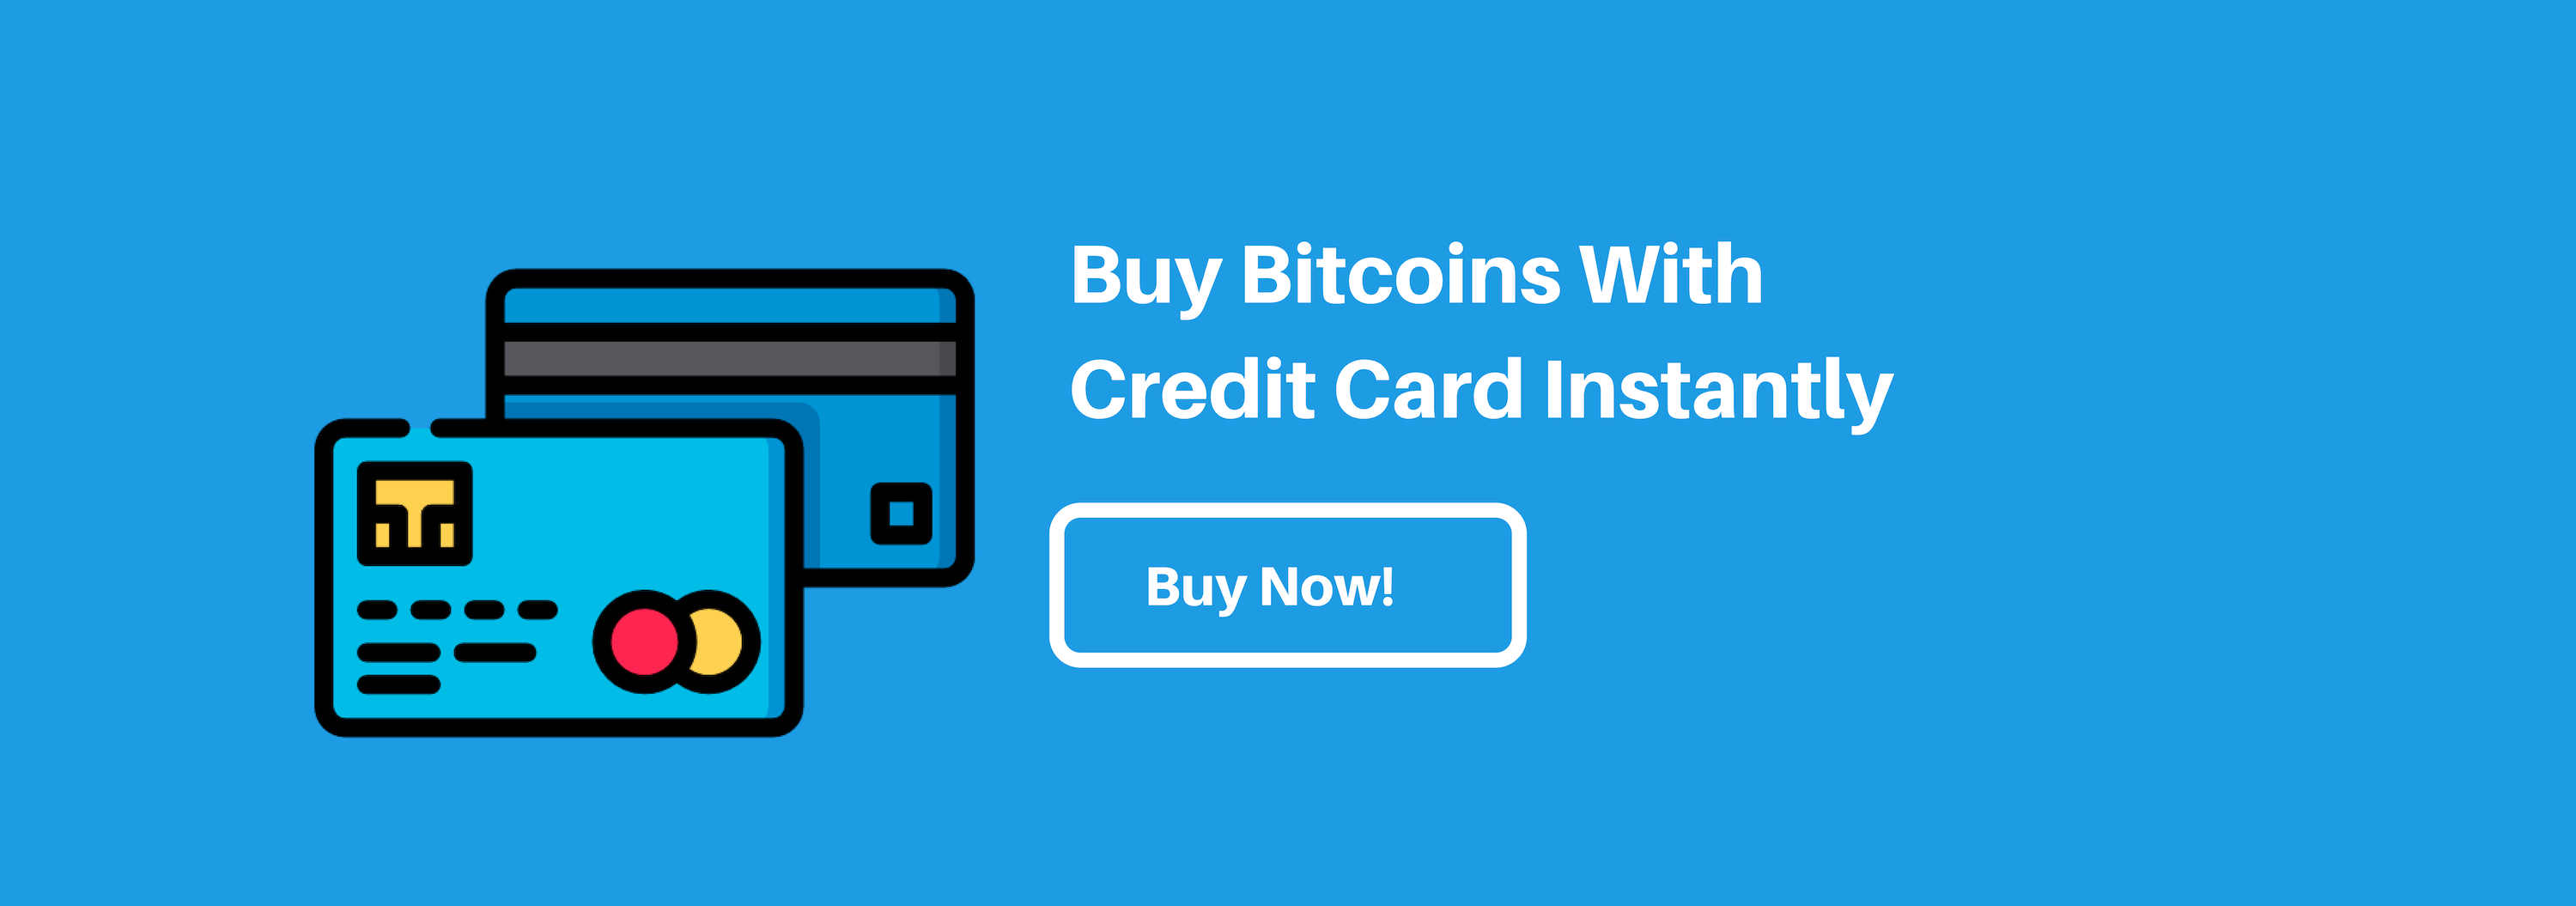 Buy Private Proxies With Bitcoin Buy Bitcoin With Credit Card Mrs - 